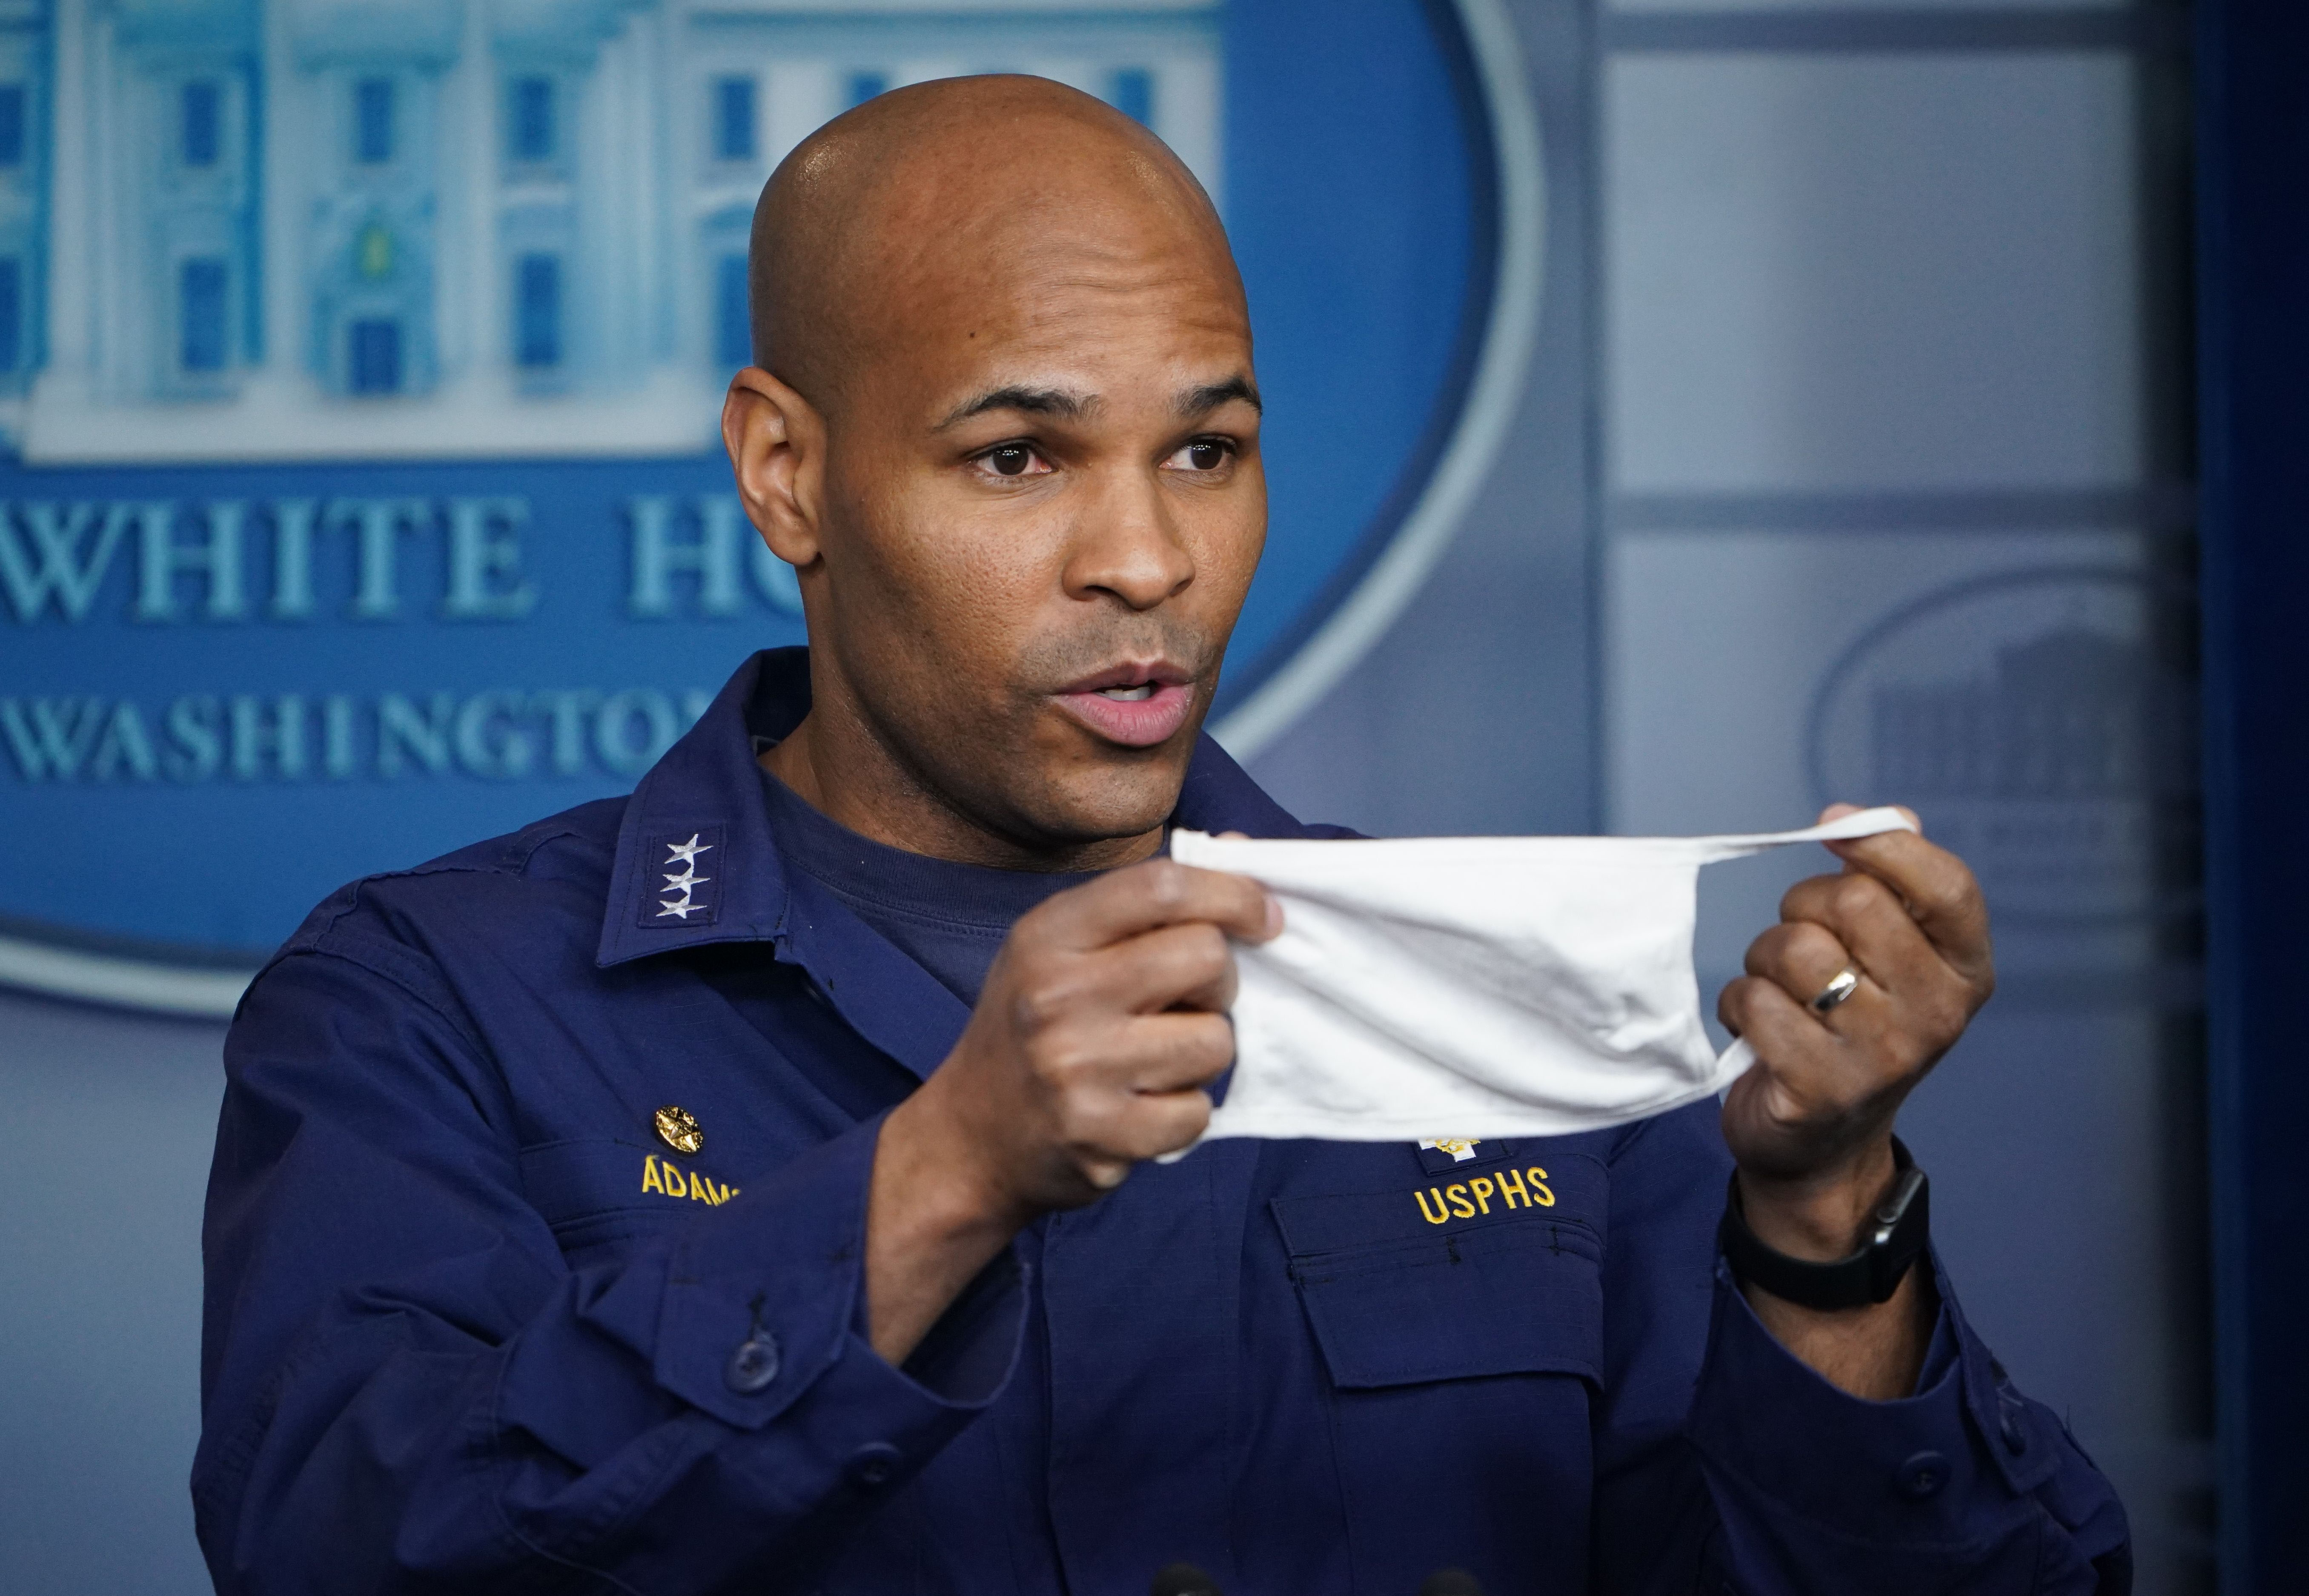 US Surgeon General Jerome Adams holds a face mask during a coronavirus briefing at the White House on April 22.